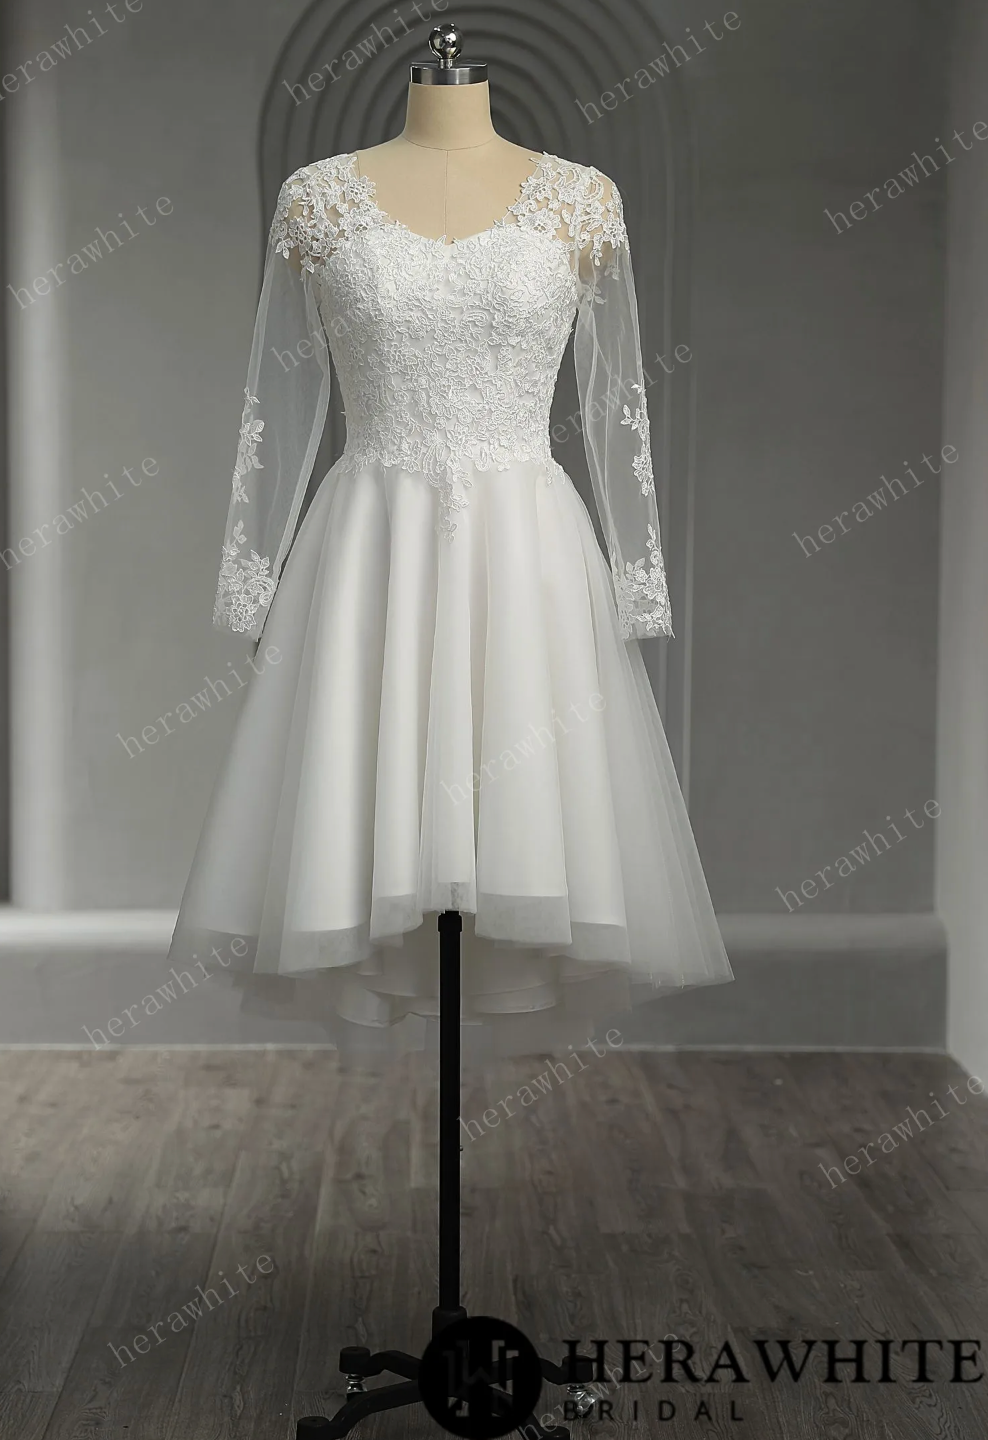 Floral Lace Short Wedding Dress with Lace Up Back